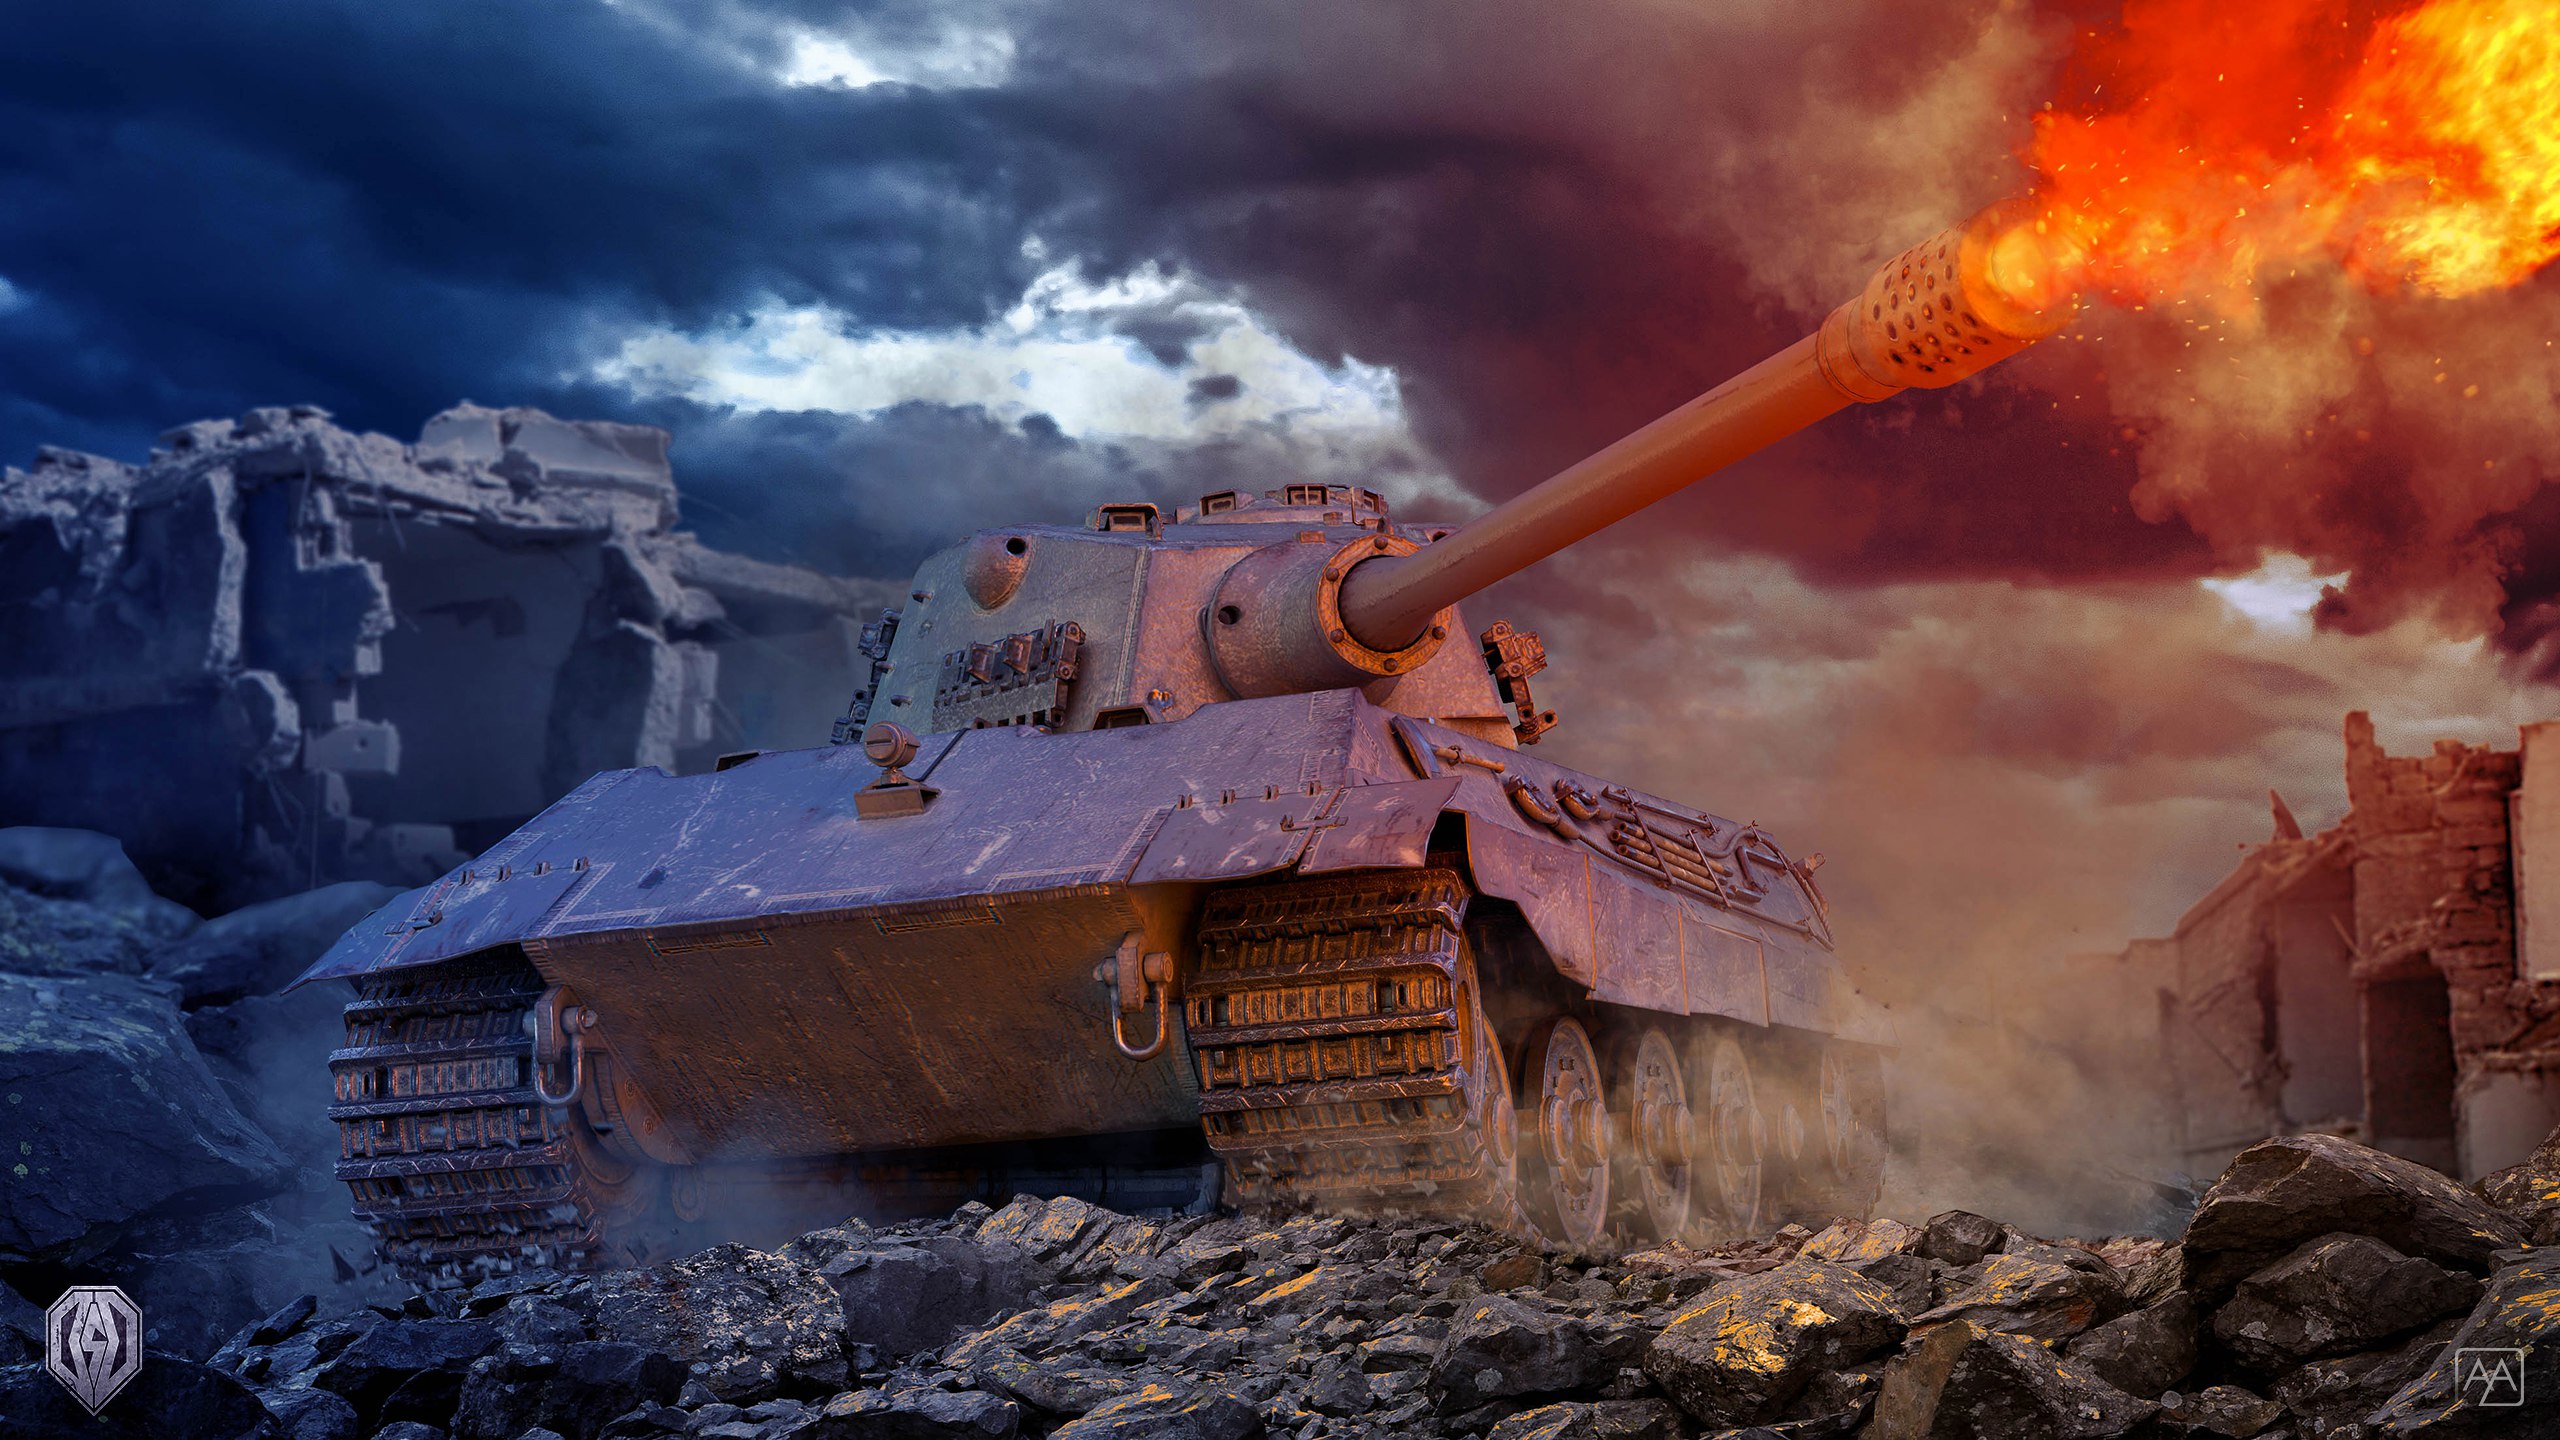 Wot from wit. Е-75 танк. Ворлд оф танк е75. E75 танк. Е-75 танк в World of Tanks.